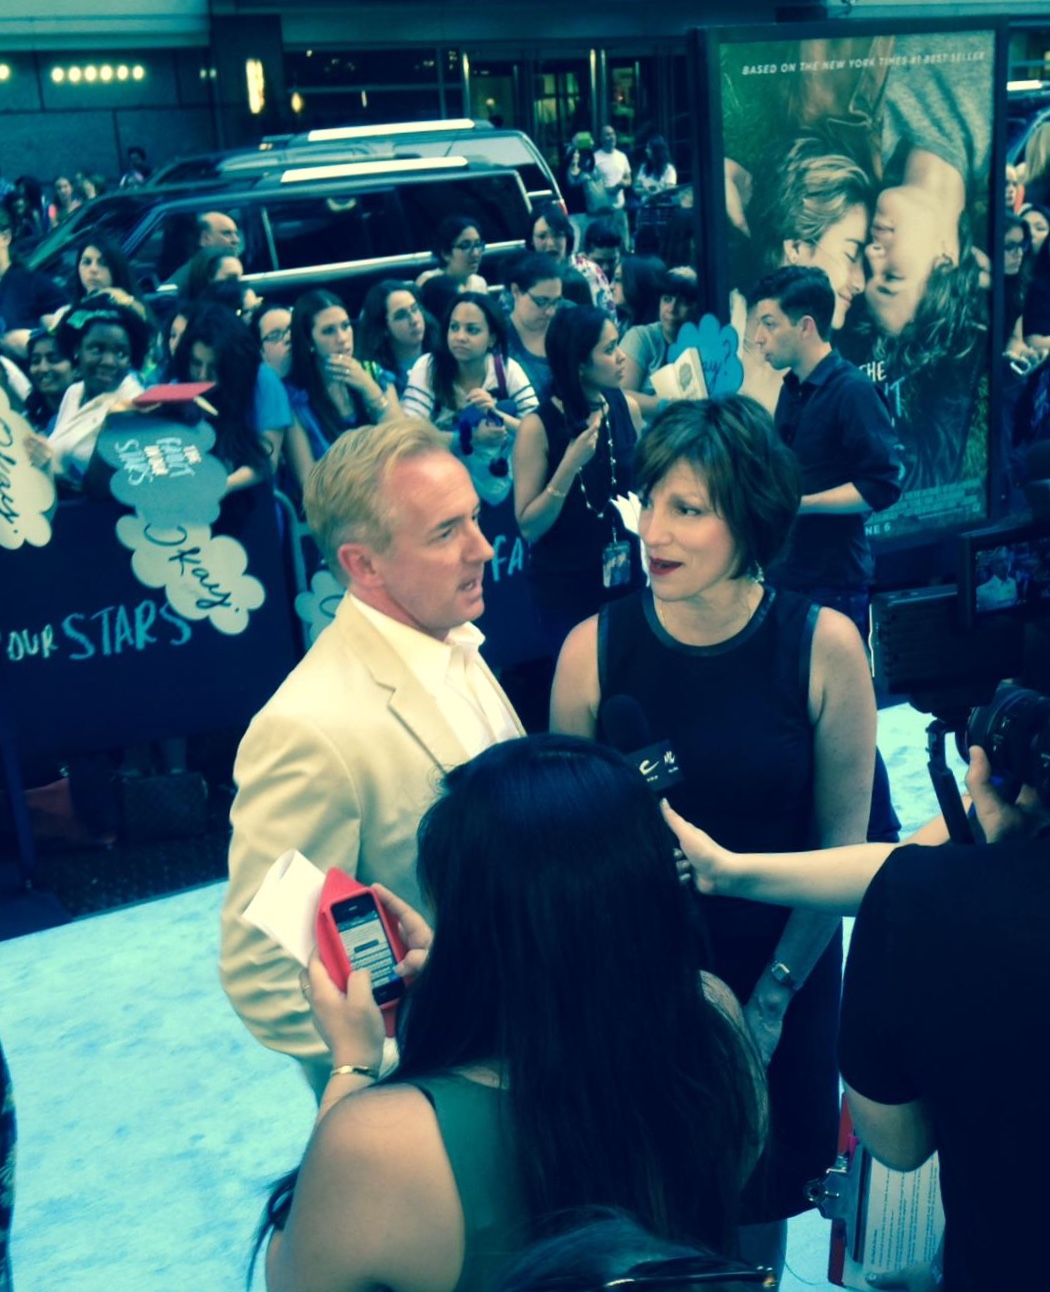 David Whalen (Gus's Dad) & Mila Govich (Gus's Mom) at the New York Premiere of THE FAULT IN OUR STARS.